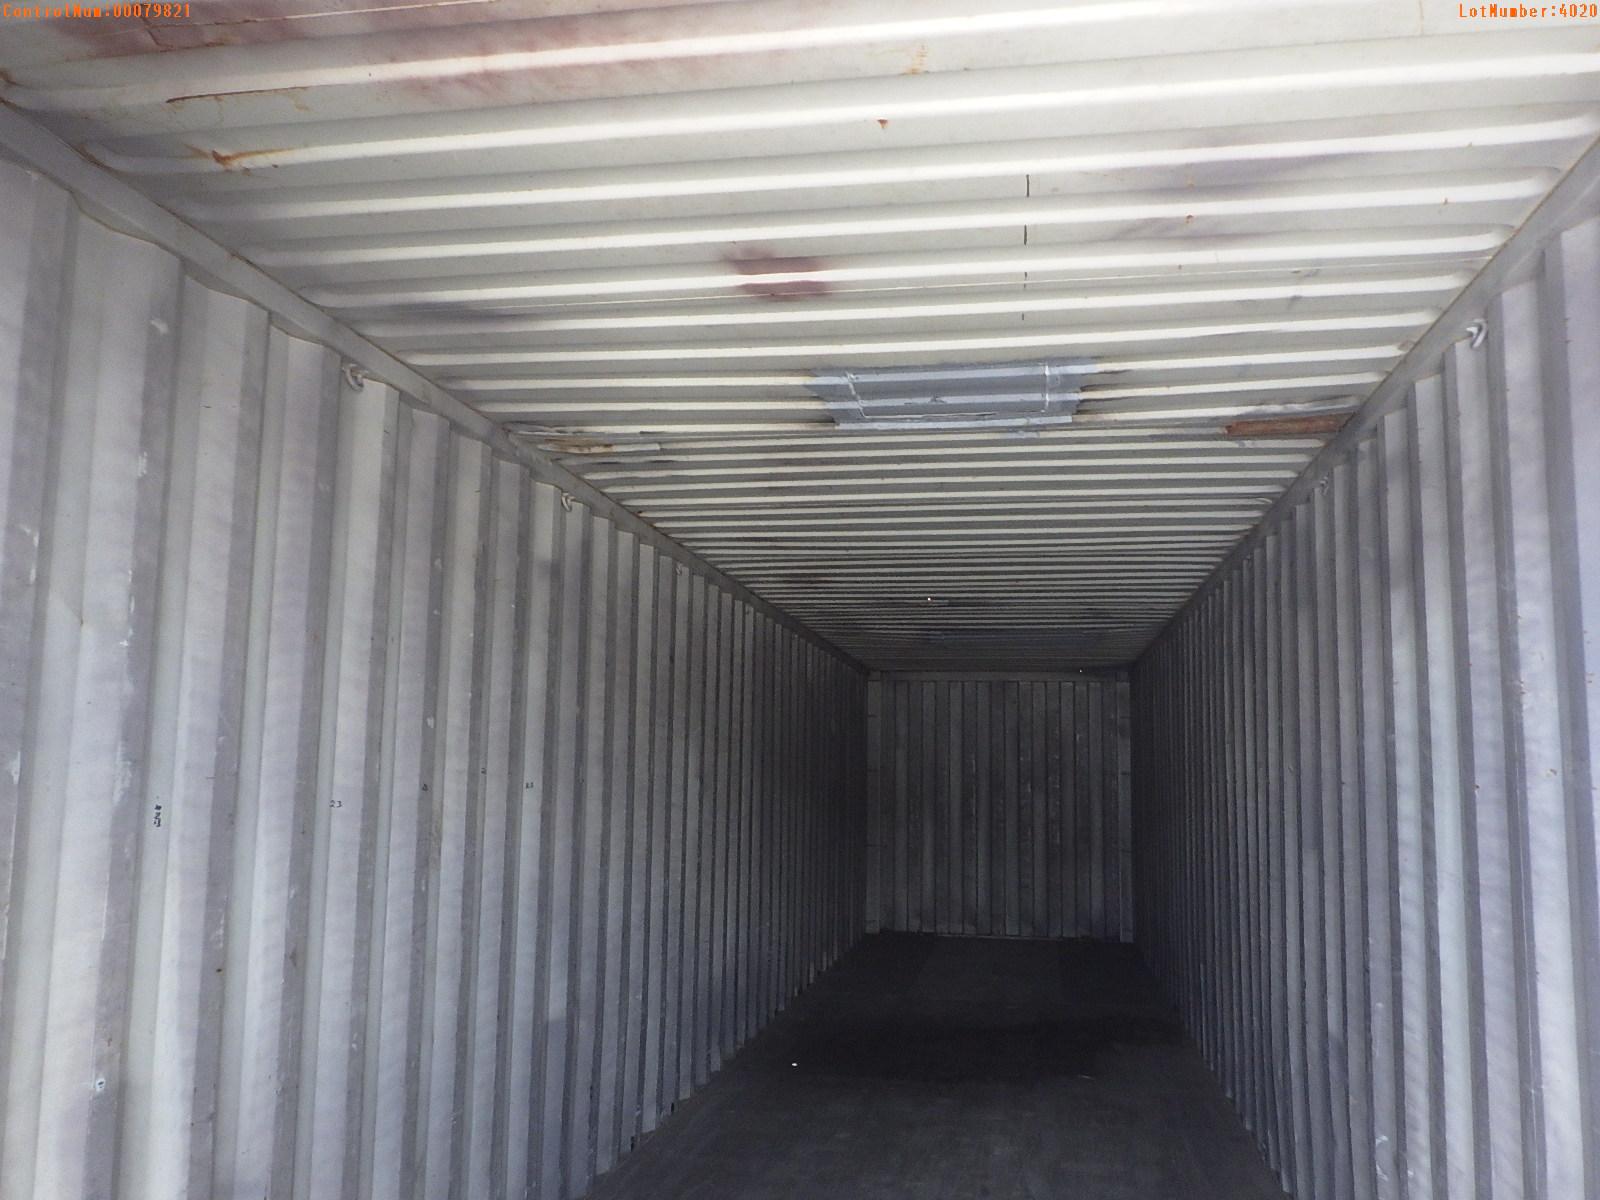 5-04020 (Equip.-Container)  Seller:Private/Dealer TRITON 40 FOOT METAL SHIPPING